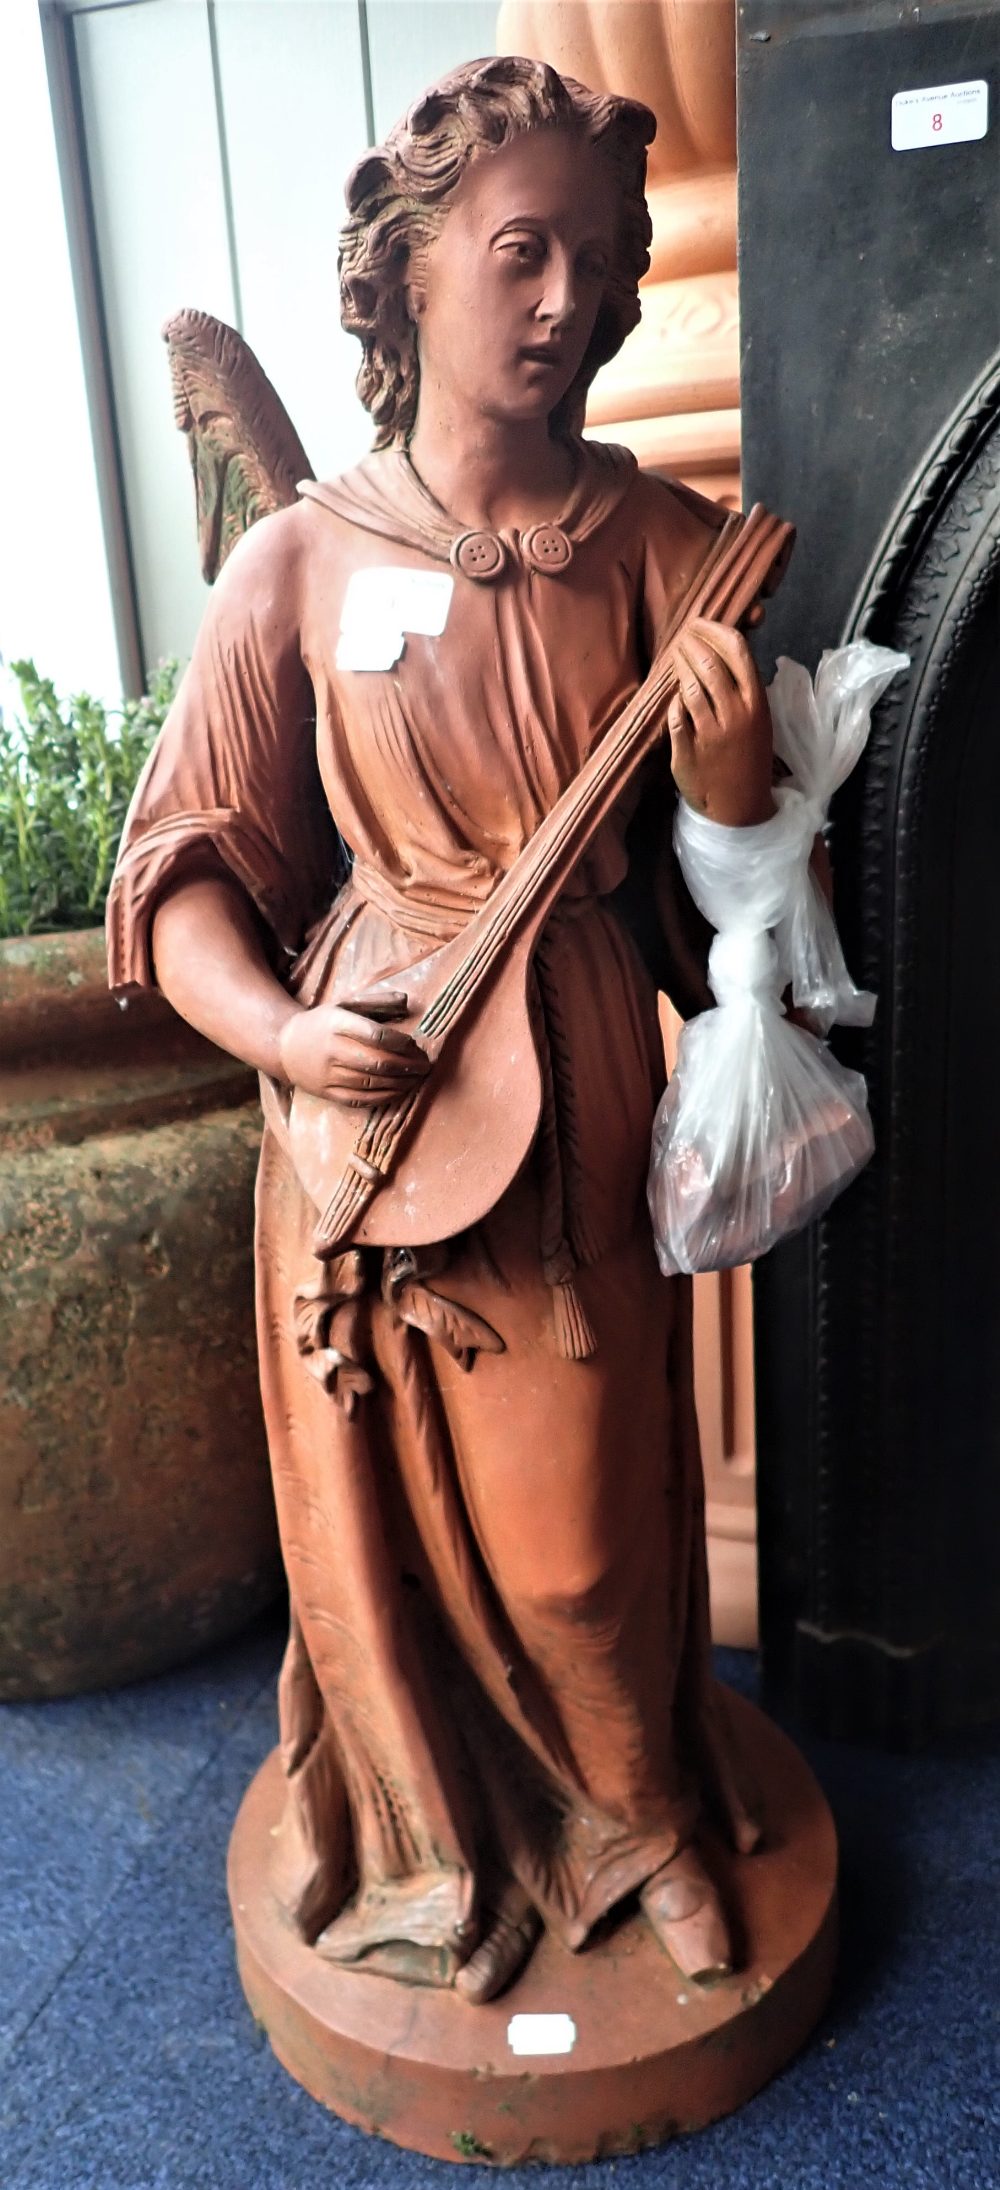 A MOULDED TERRACOTTA FIGURE OF AN ANGEL PLAYING A LUTE, 79cm high